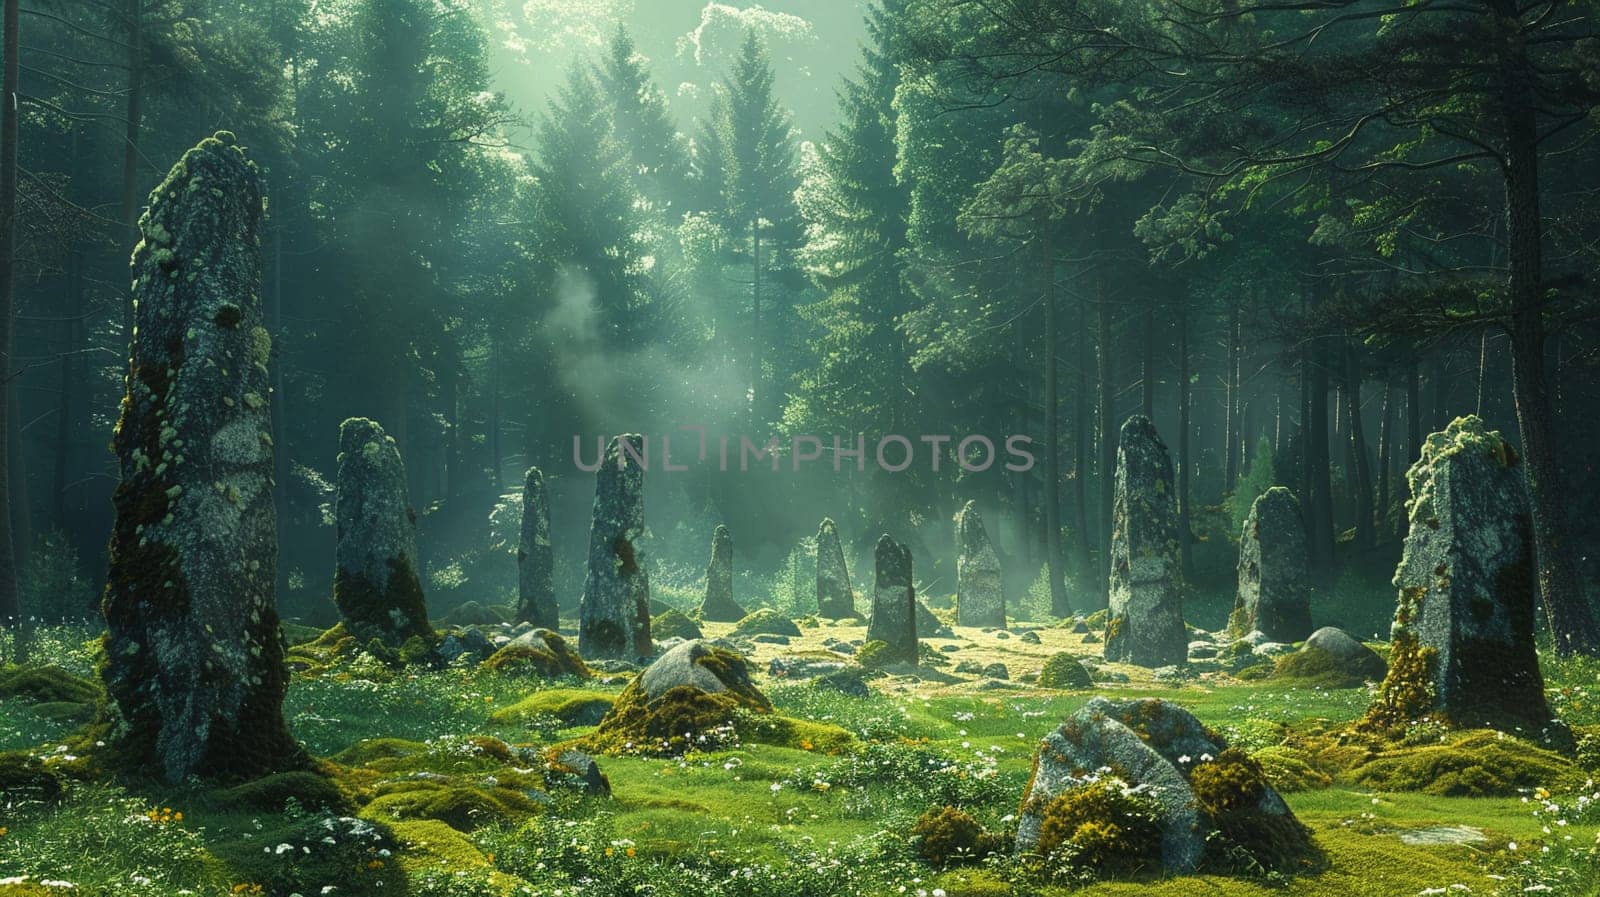 Druidic Circles Standing Silent in a Forest Clearing, The stones blur into a sacred space, rooted in nature and the old ways.